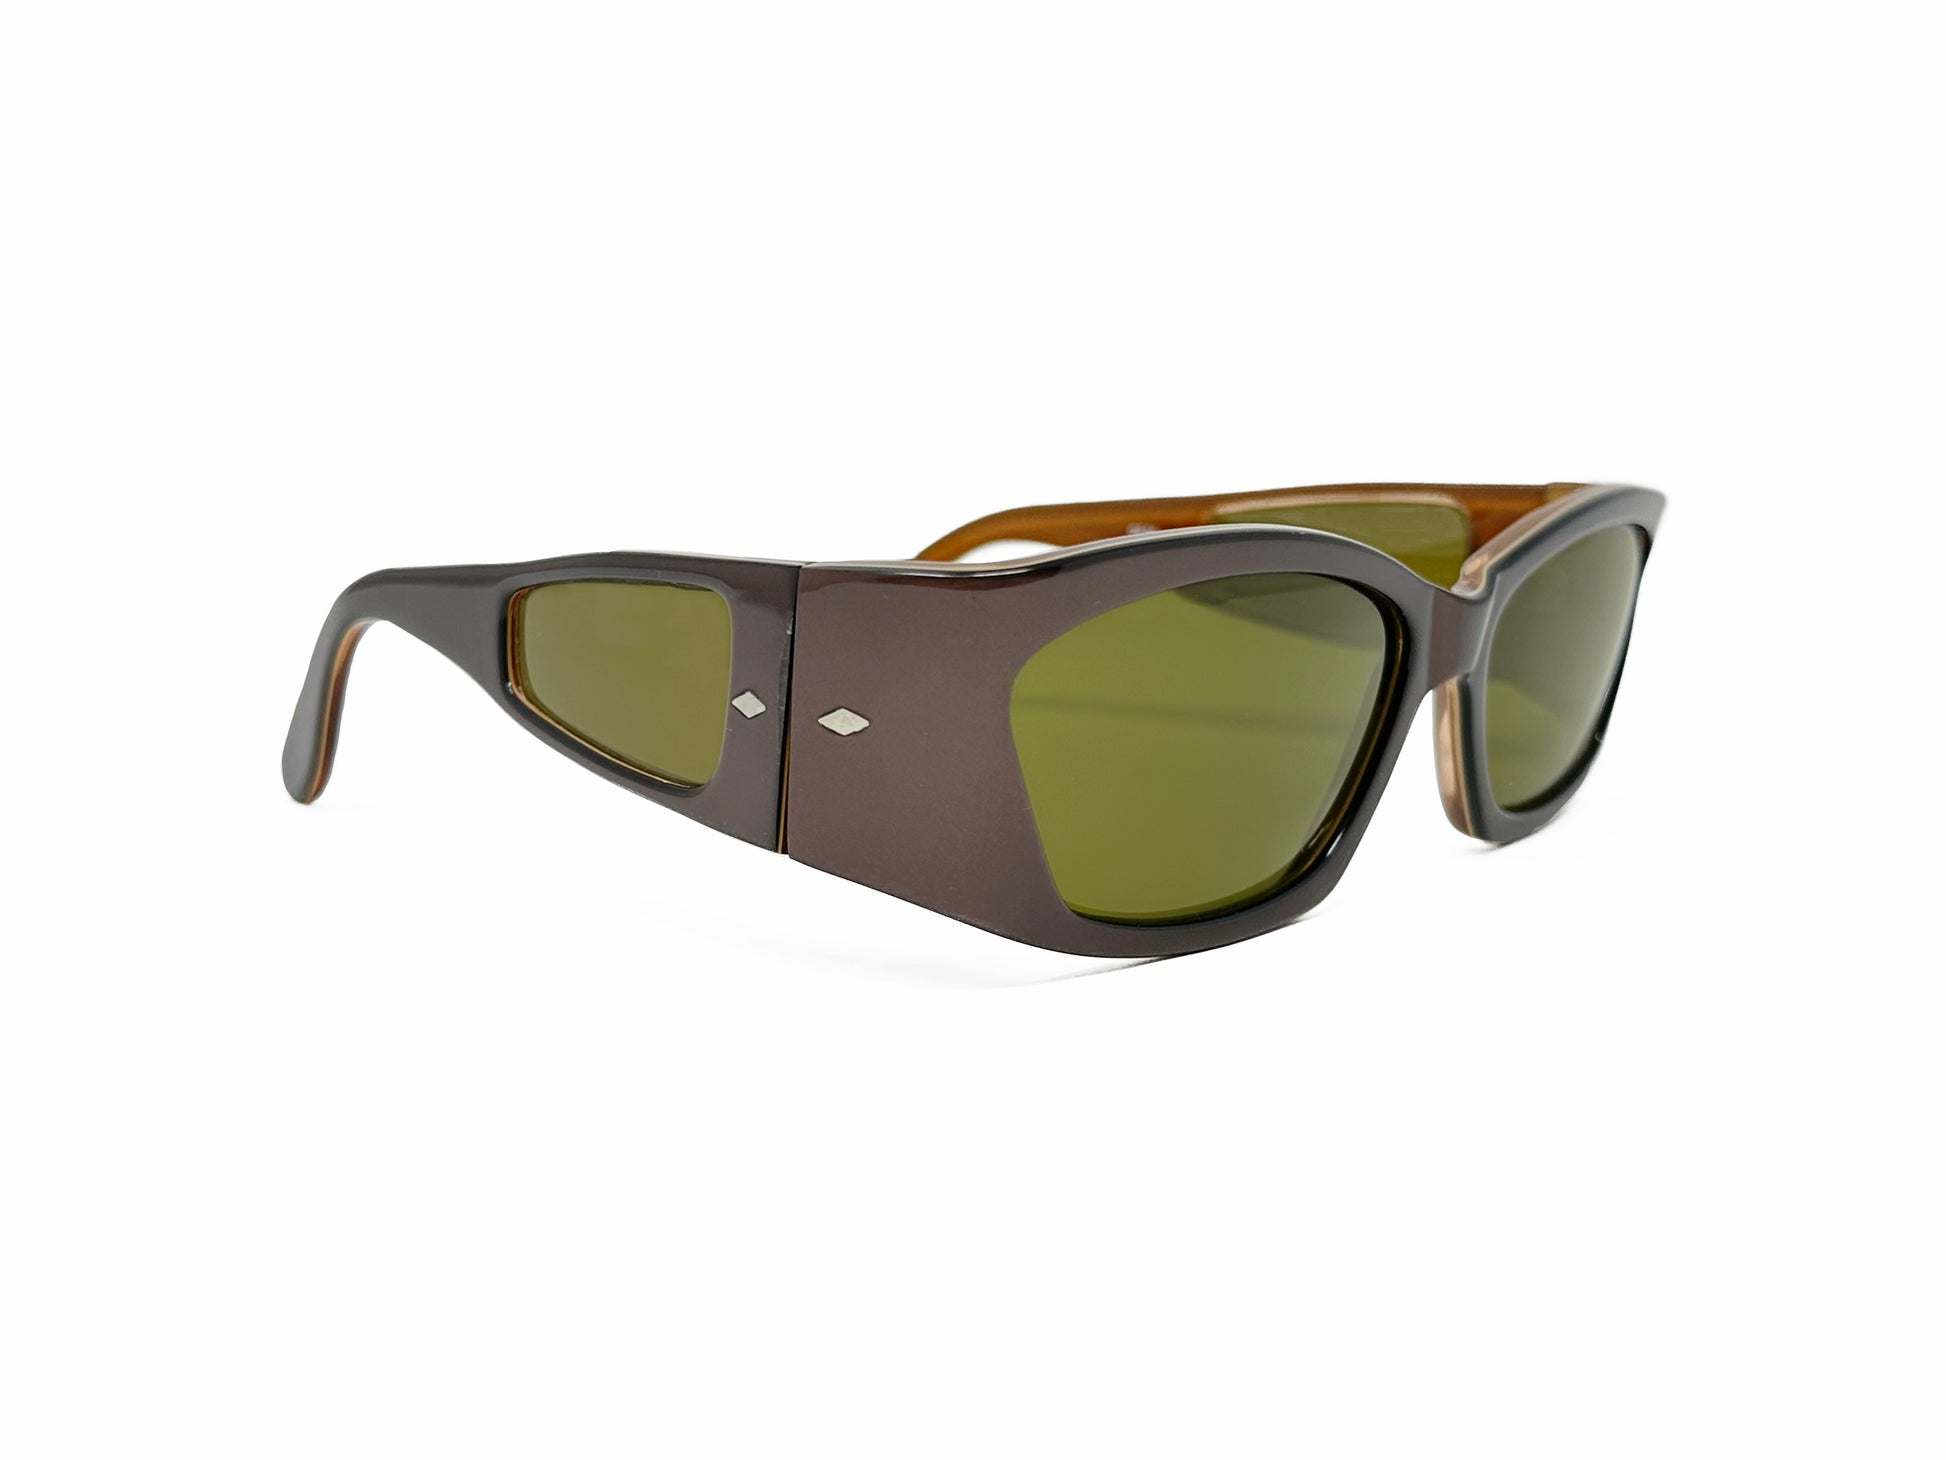 Kador rectangular, acetate sunglasses with cat-eye shaped lens. Model: DF26. COlor: 1434- Brown with green lenses. Side view.